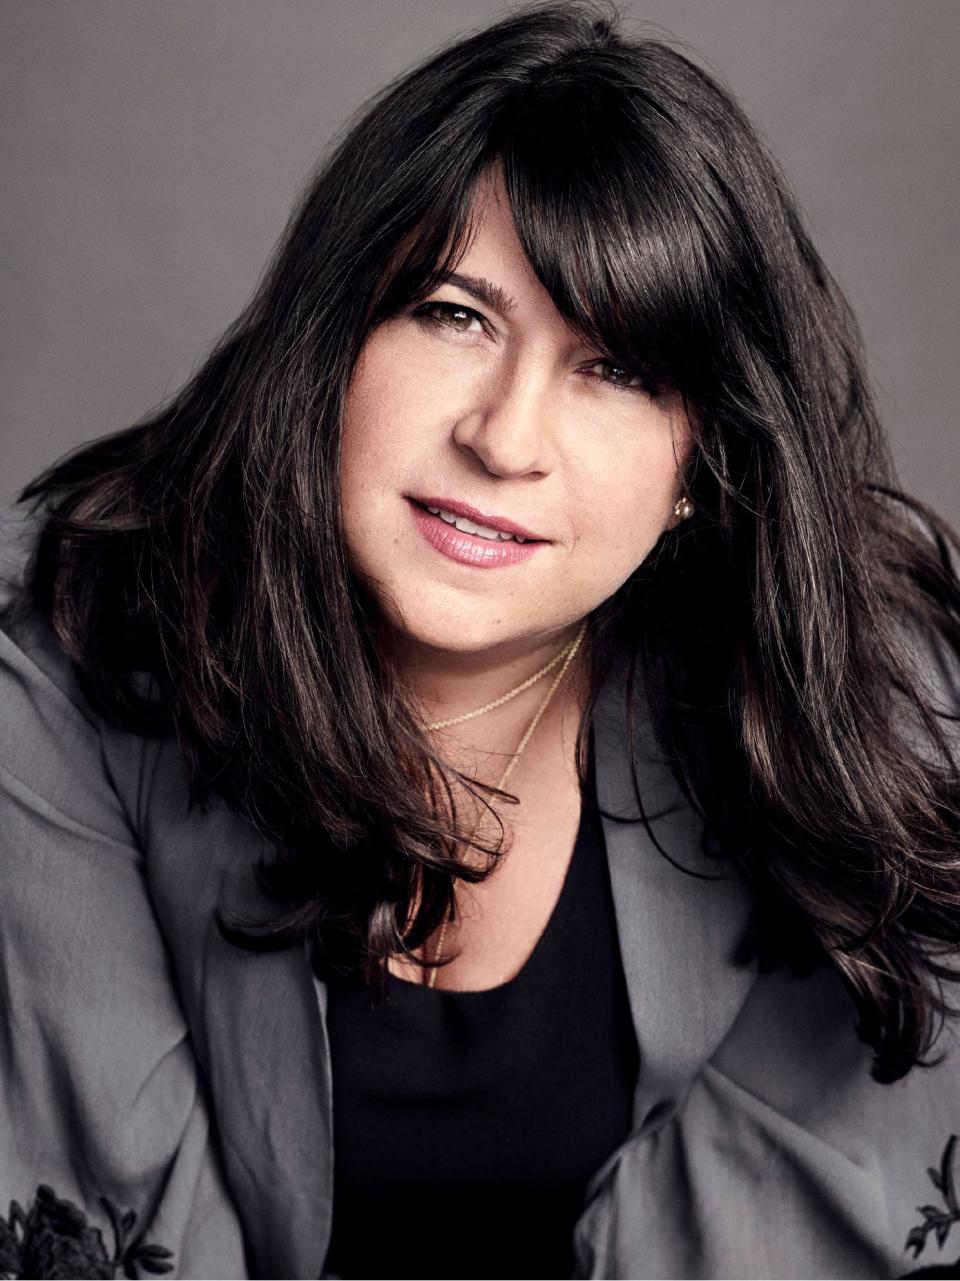 E.L. James authors new erotica series "The Mister."